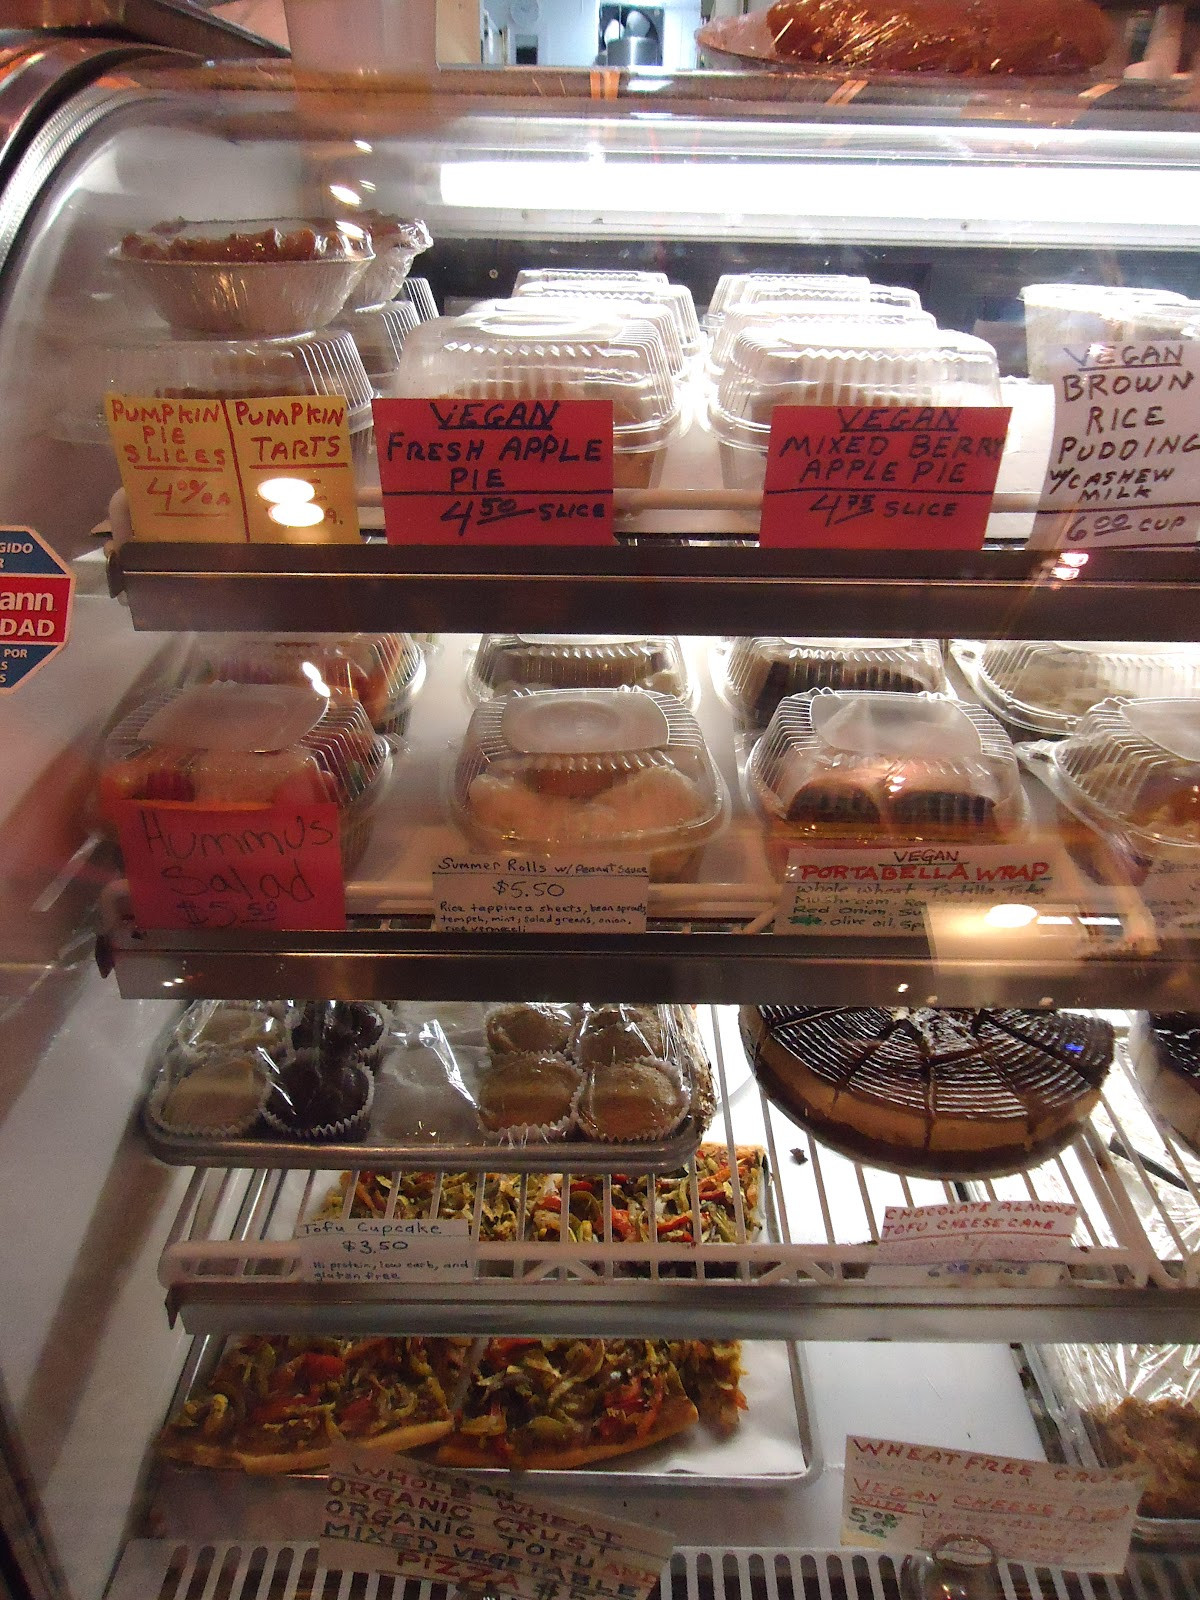 Vegan Desserts At Whole Foods
 Get Skinny Go Vegan Save New York s Whole Earth Bakery